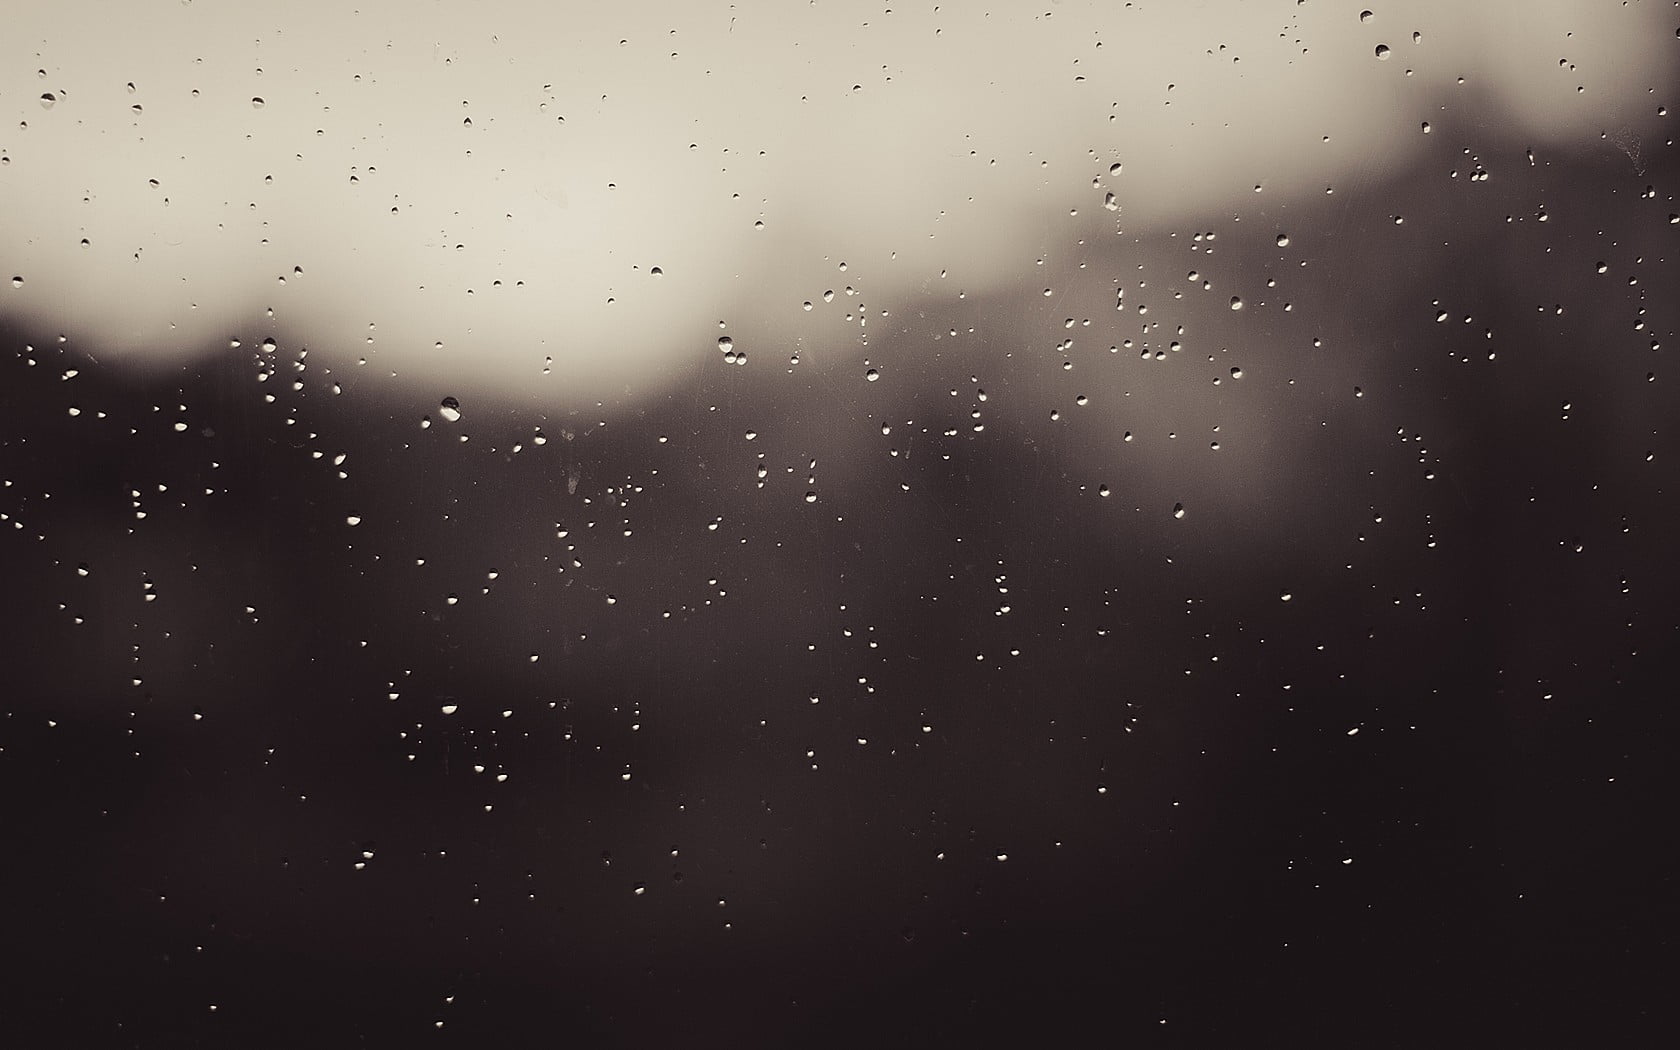 untitled, water drops, water on glass, sepia, wet, rain, no people